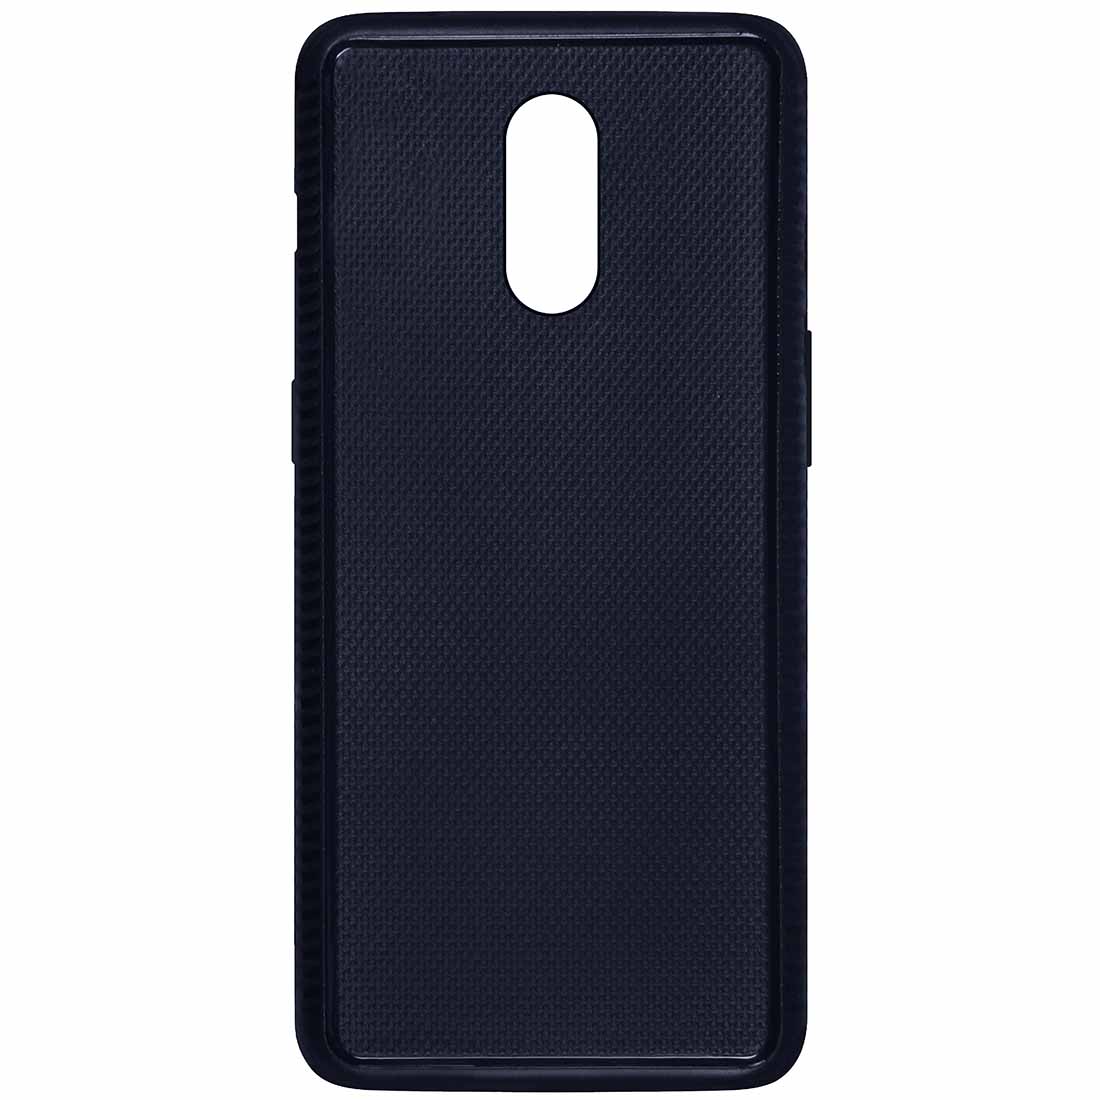 Comfort Grip Back Case Cover for OnePlus 6T